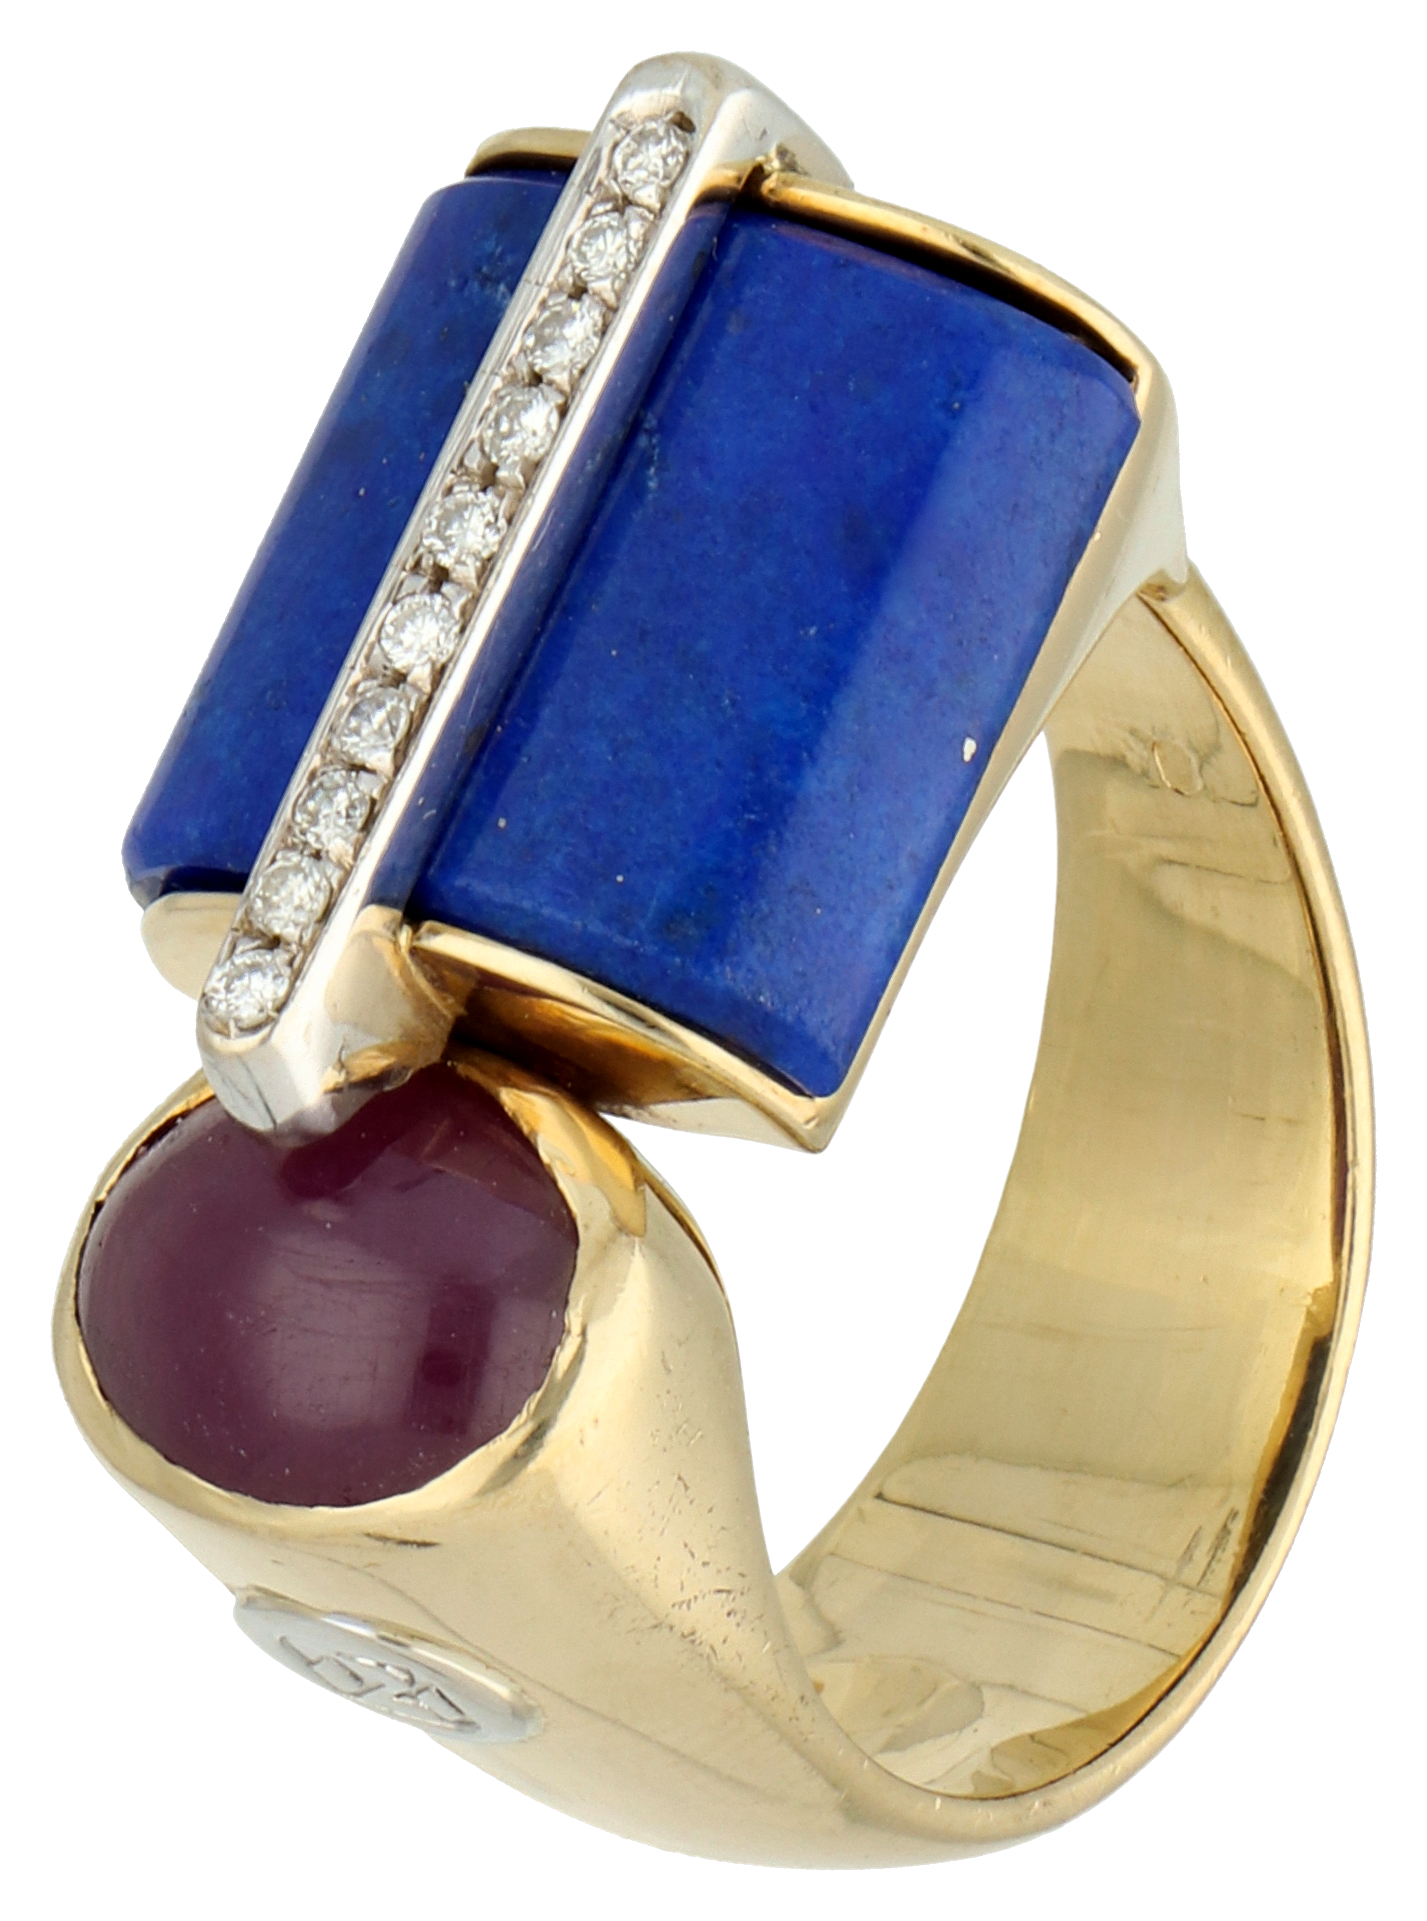 No Reserve - 18K Yellow Gold Centoventuno design ring with lapis lazuli and natural ruby.